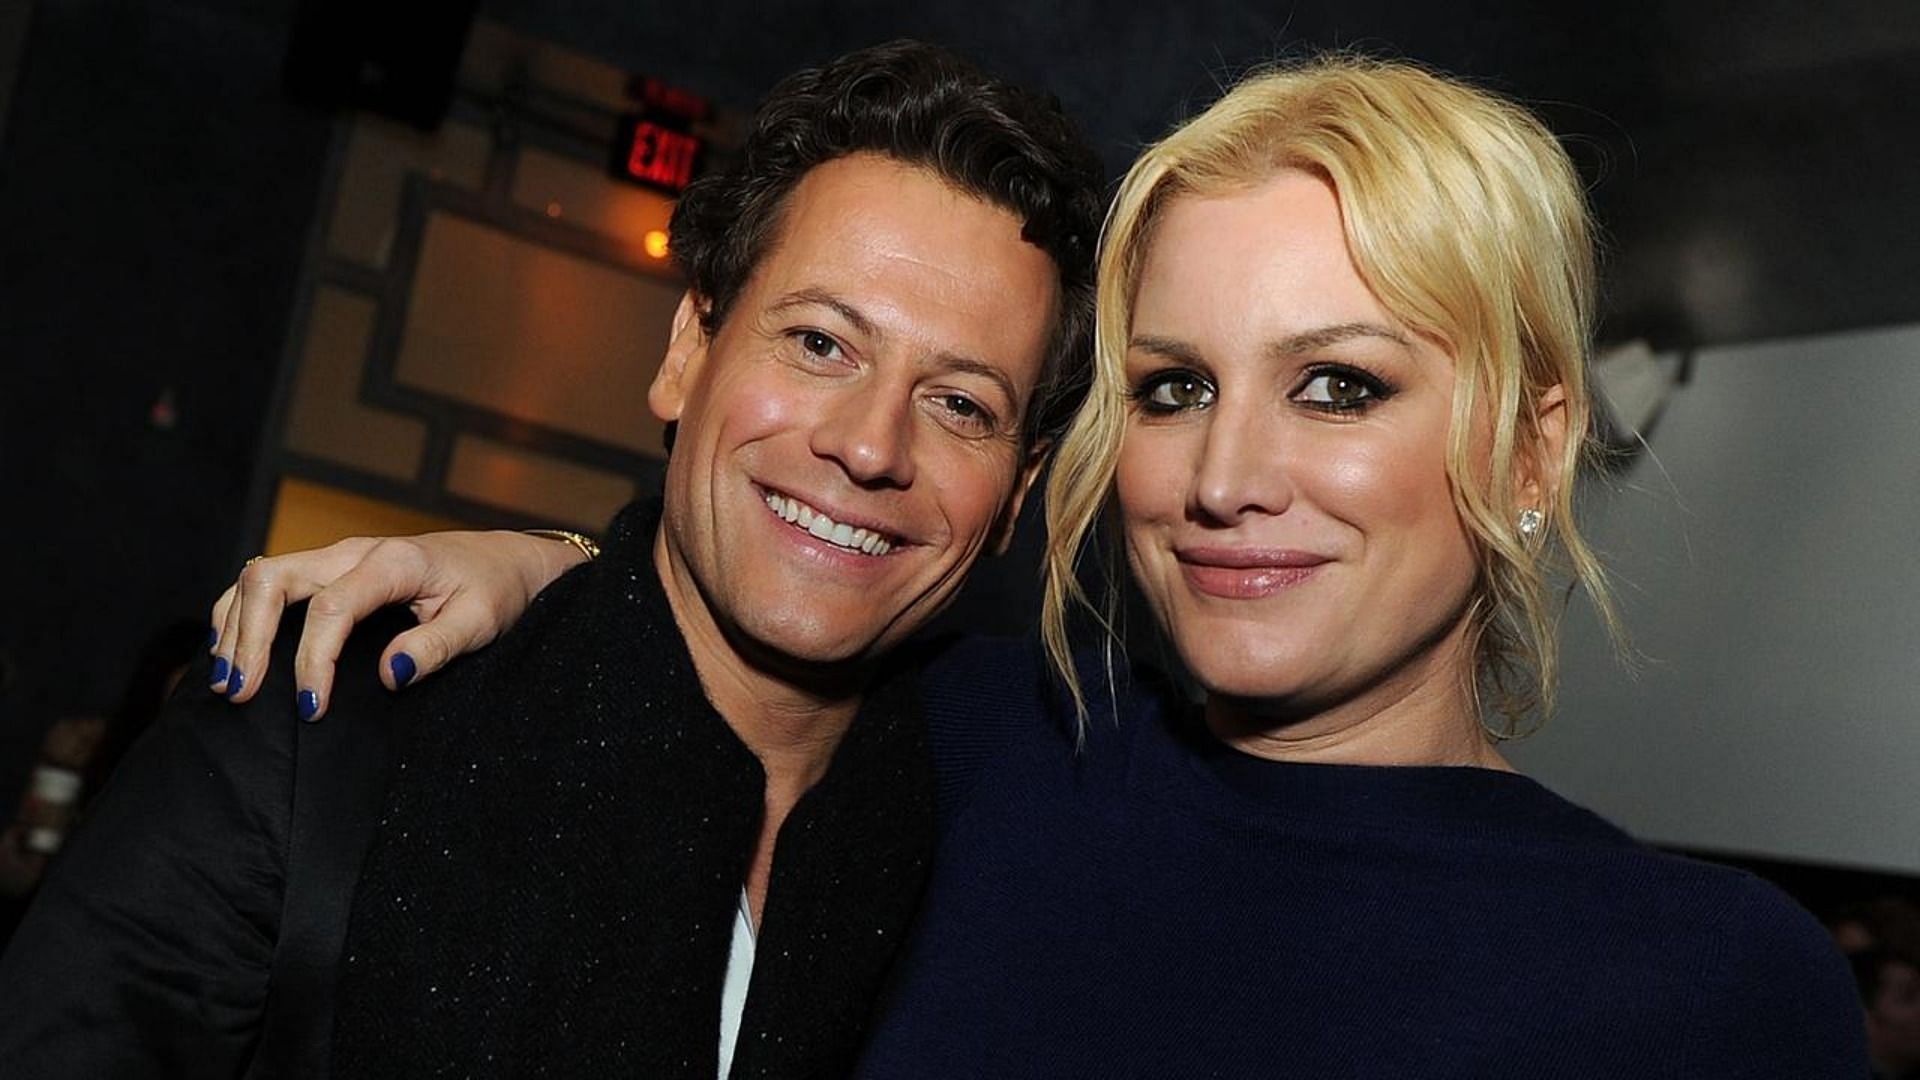 Ioan Gruffudd and Alice Evans first met in 2000 and got married seven years later (Image via Getty Images/ Kevin Winter)